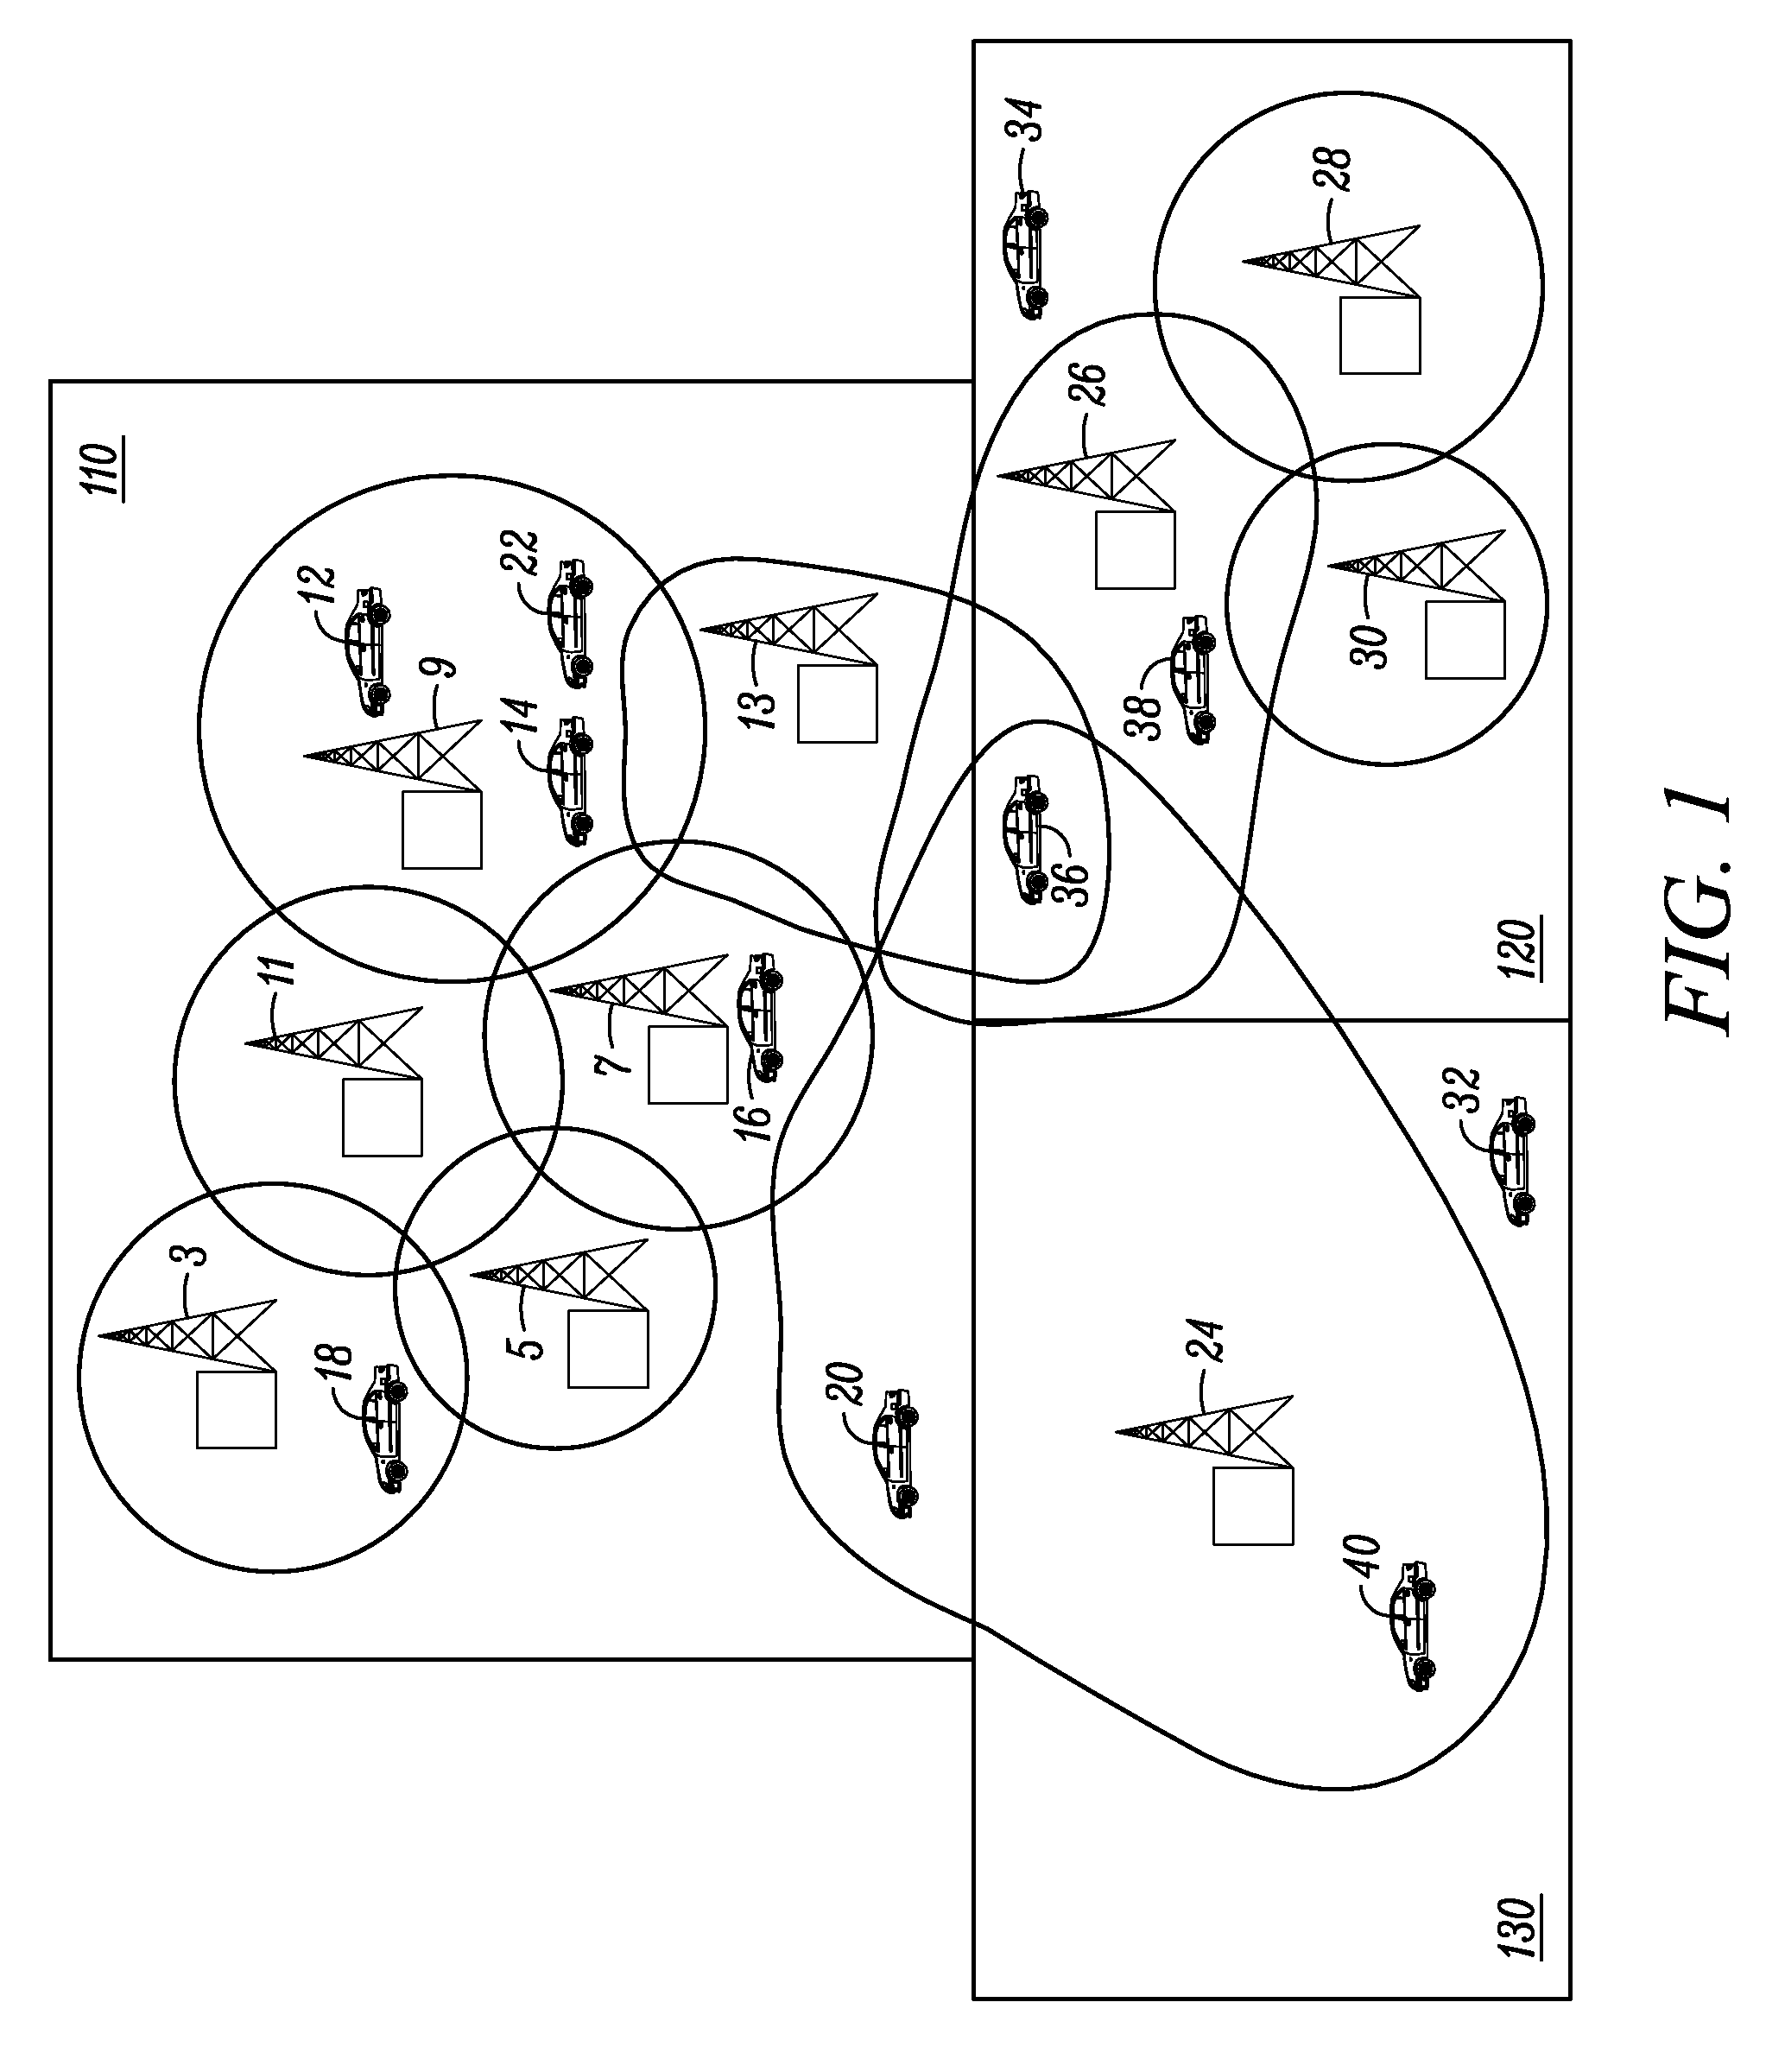 Method of Efficiently Synchronizing to a Desired Timeslot in a Time Division Multiple Access Communication System